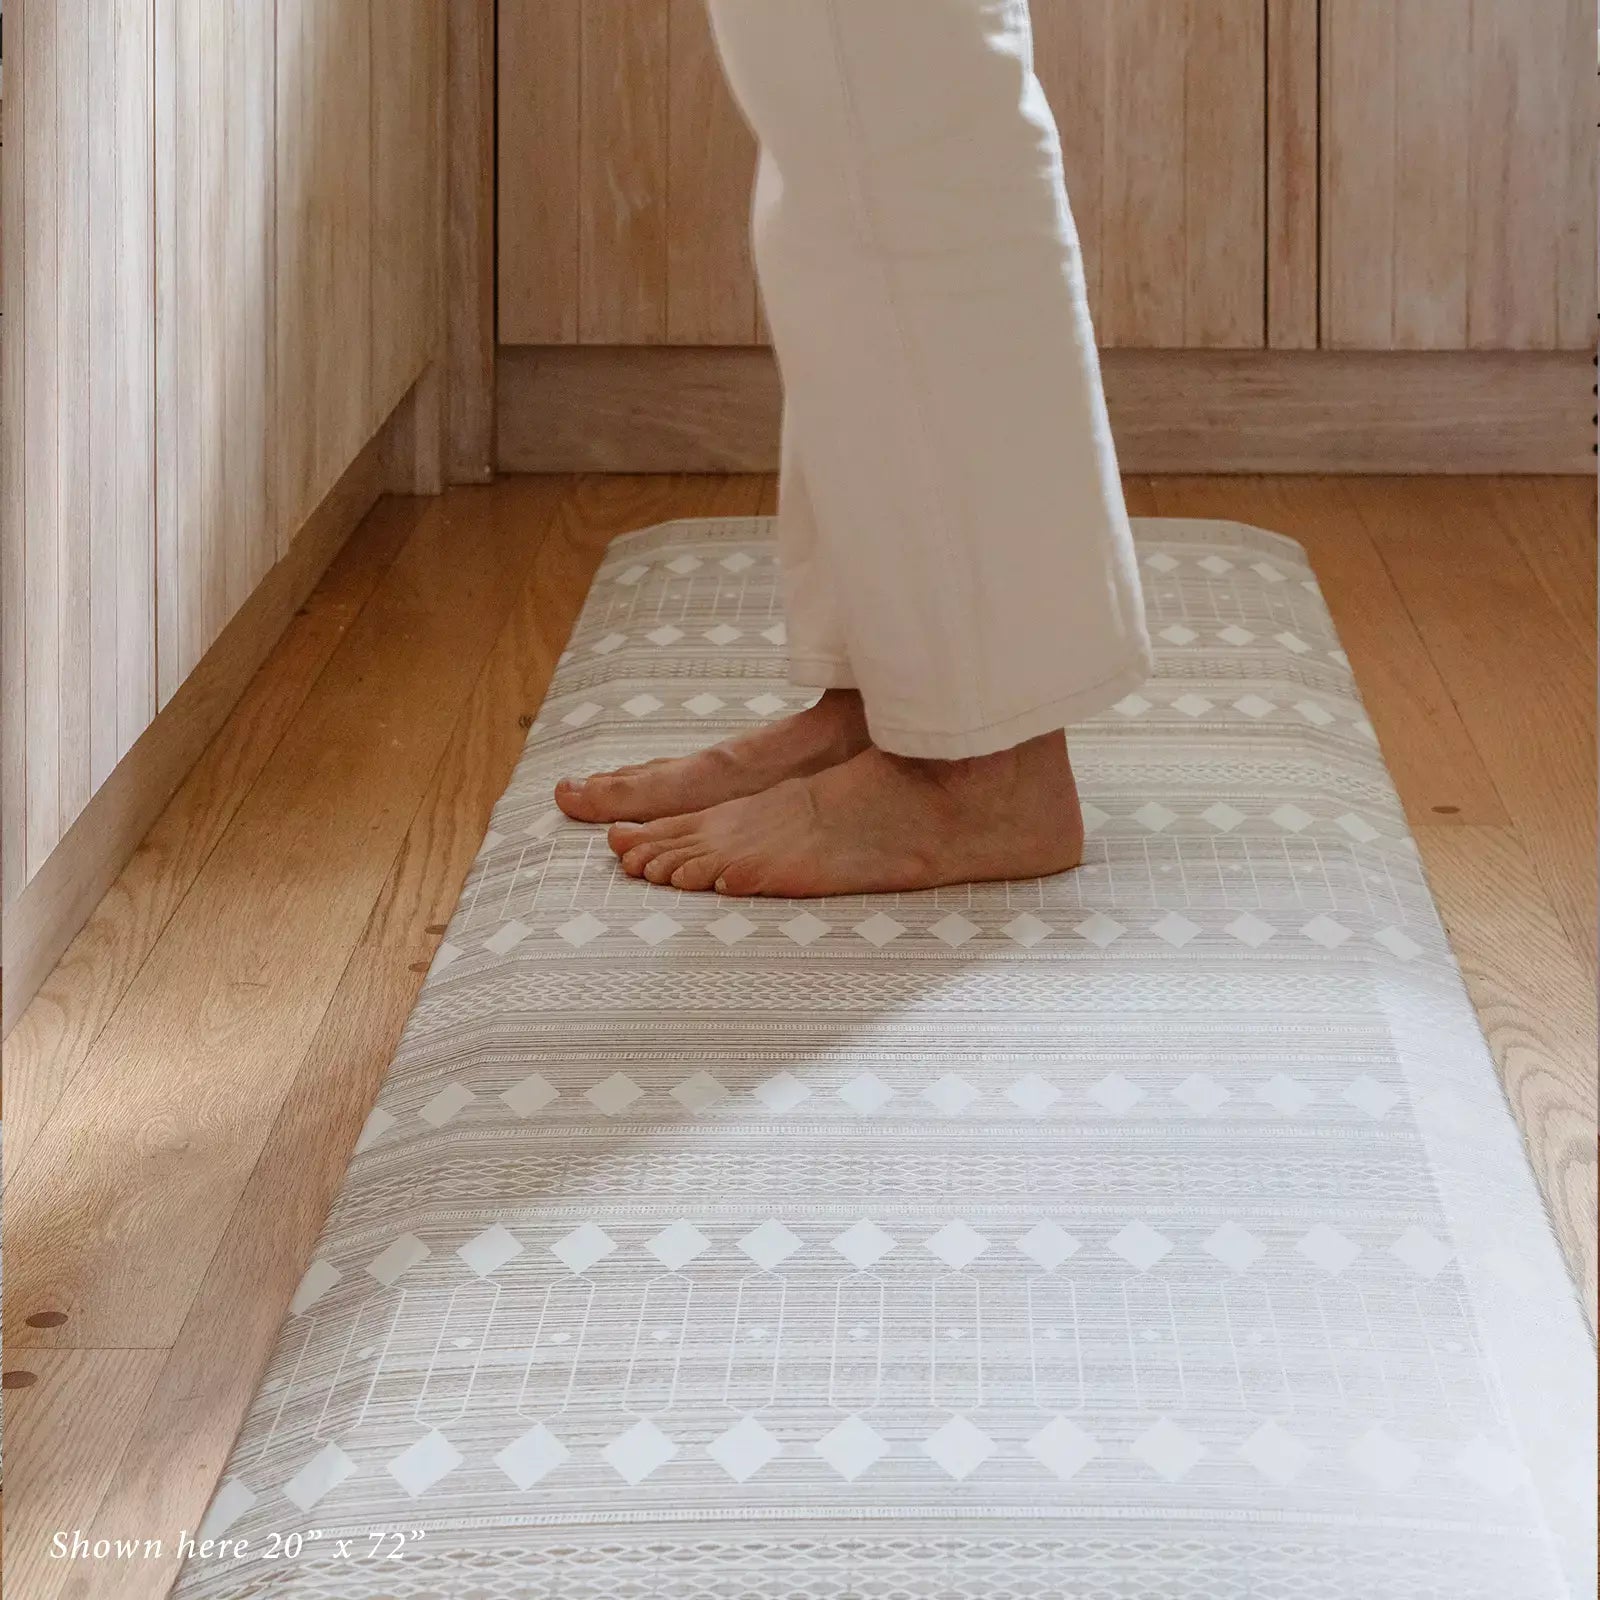 Beige and White Boho Nordic Print kitchen Mat shown with woman standing on size 20x72